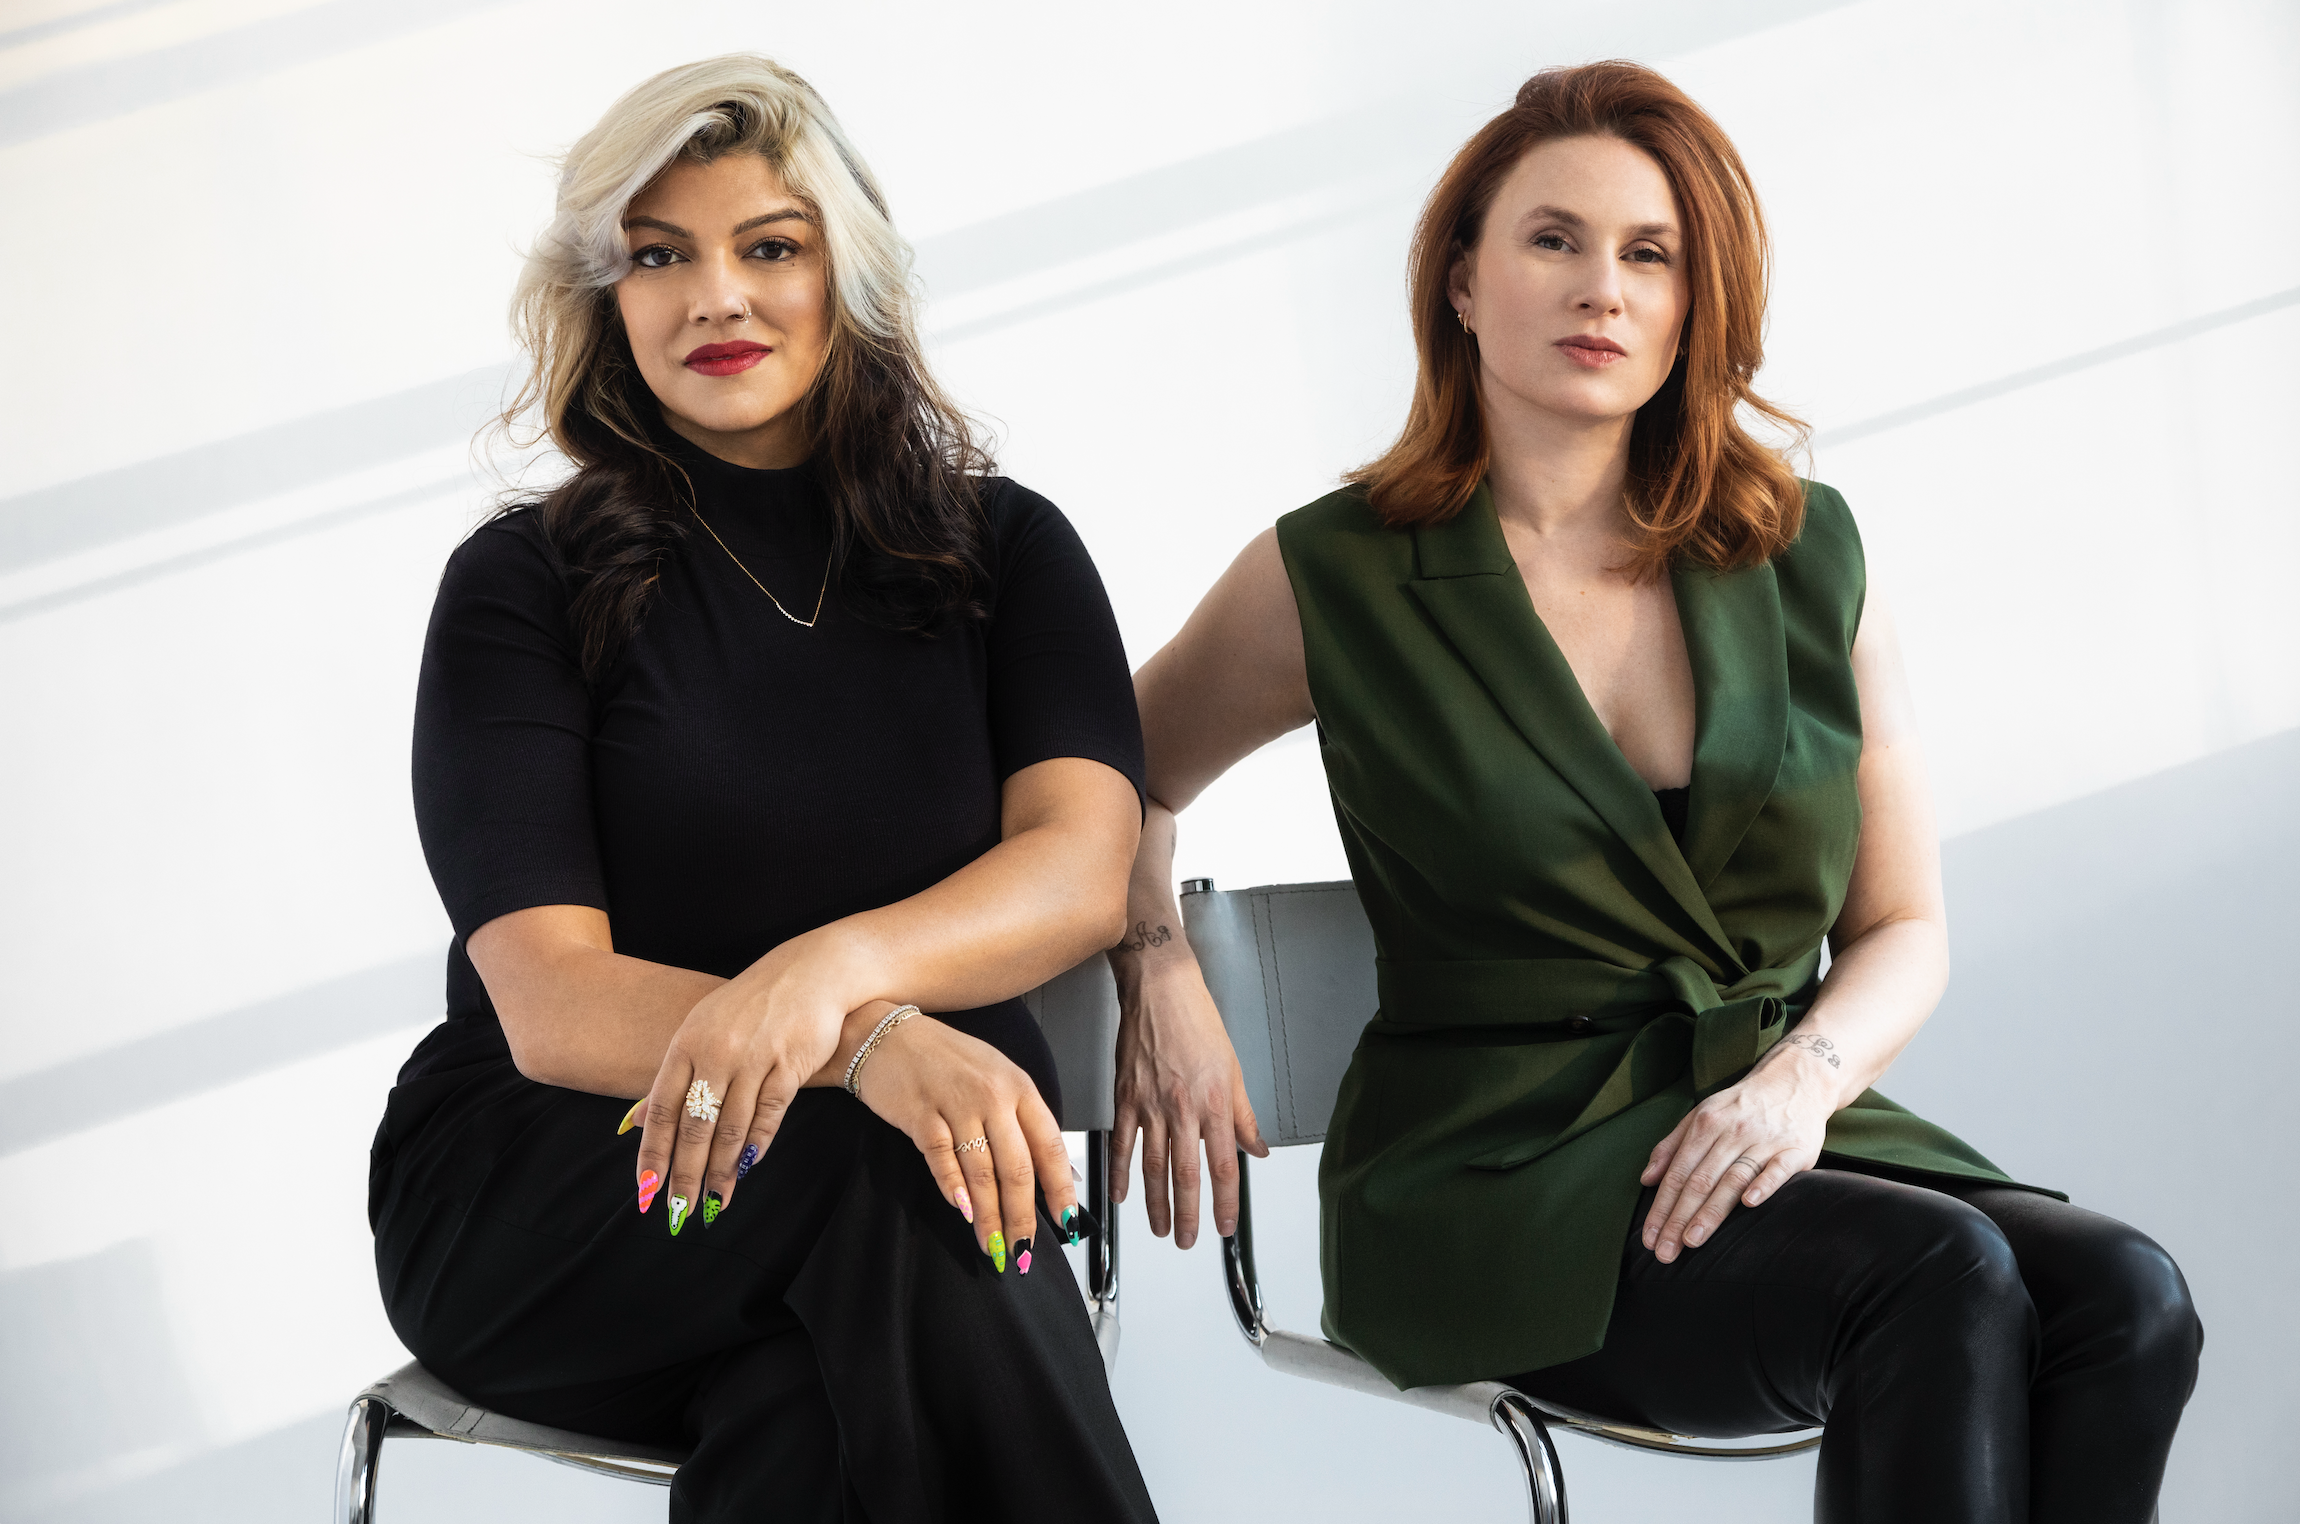 Portrait of two women sitting on metal chairs against a neutral white background.